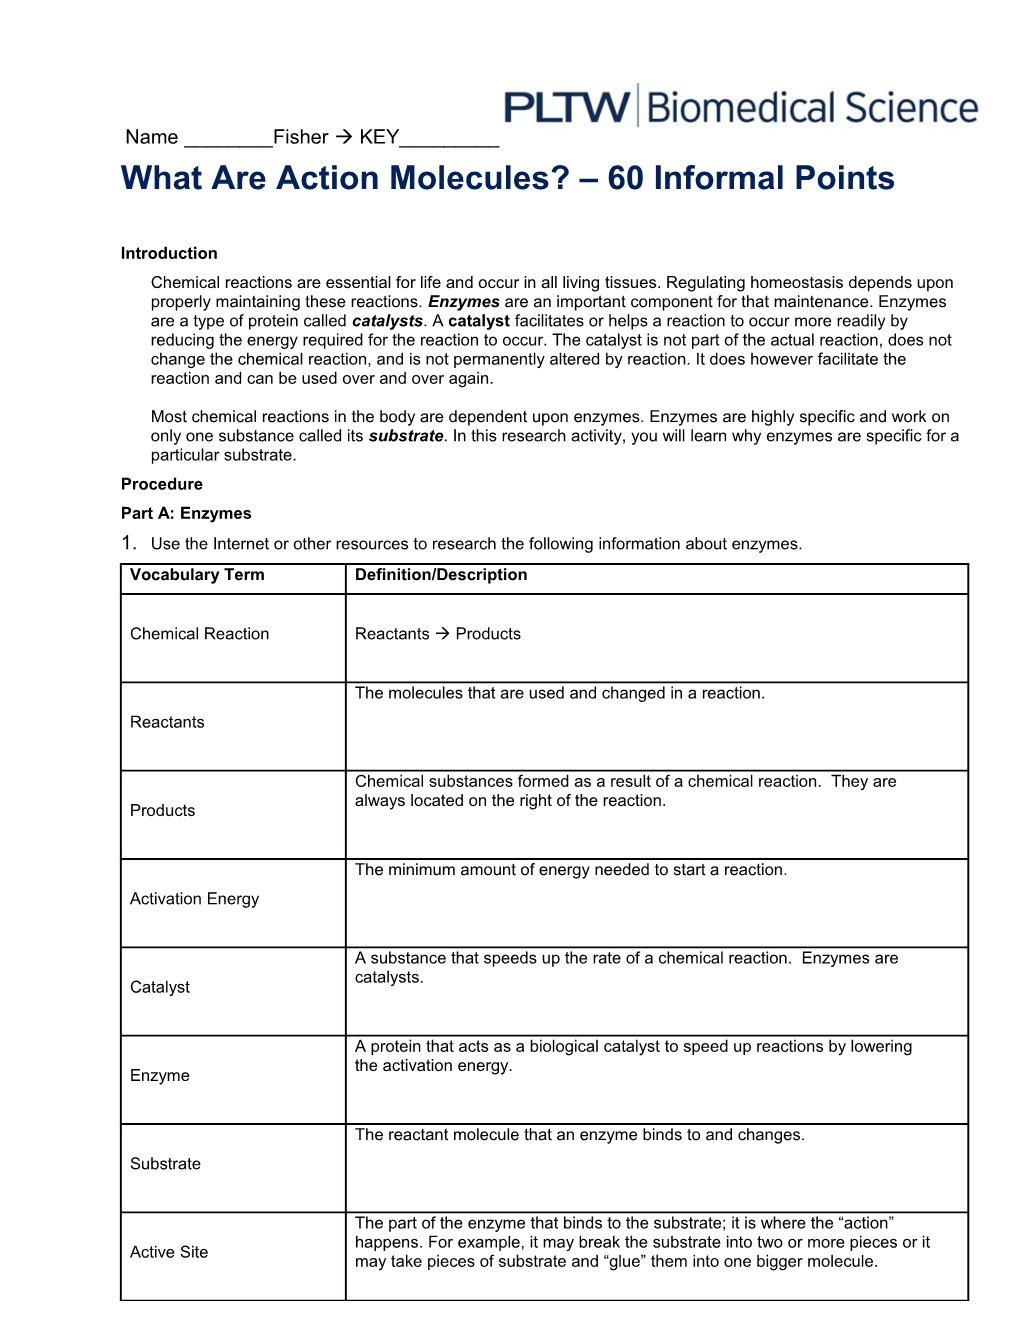 What Are Action Molecules? 60 Informal Points